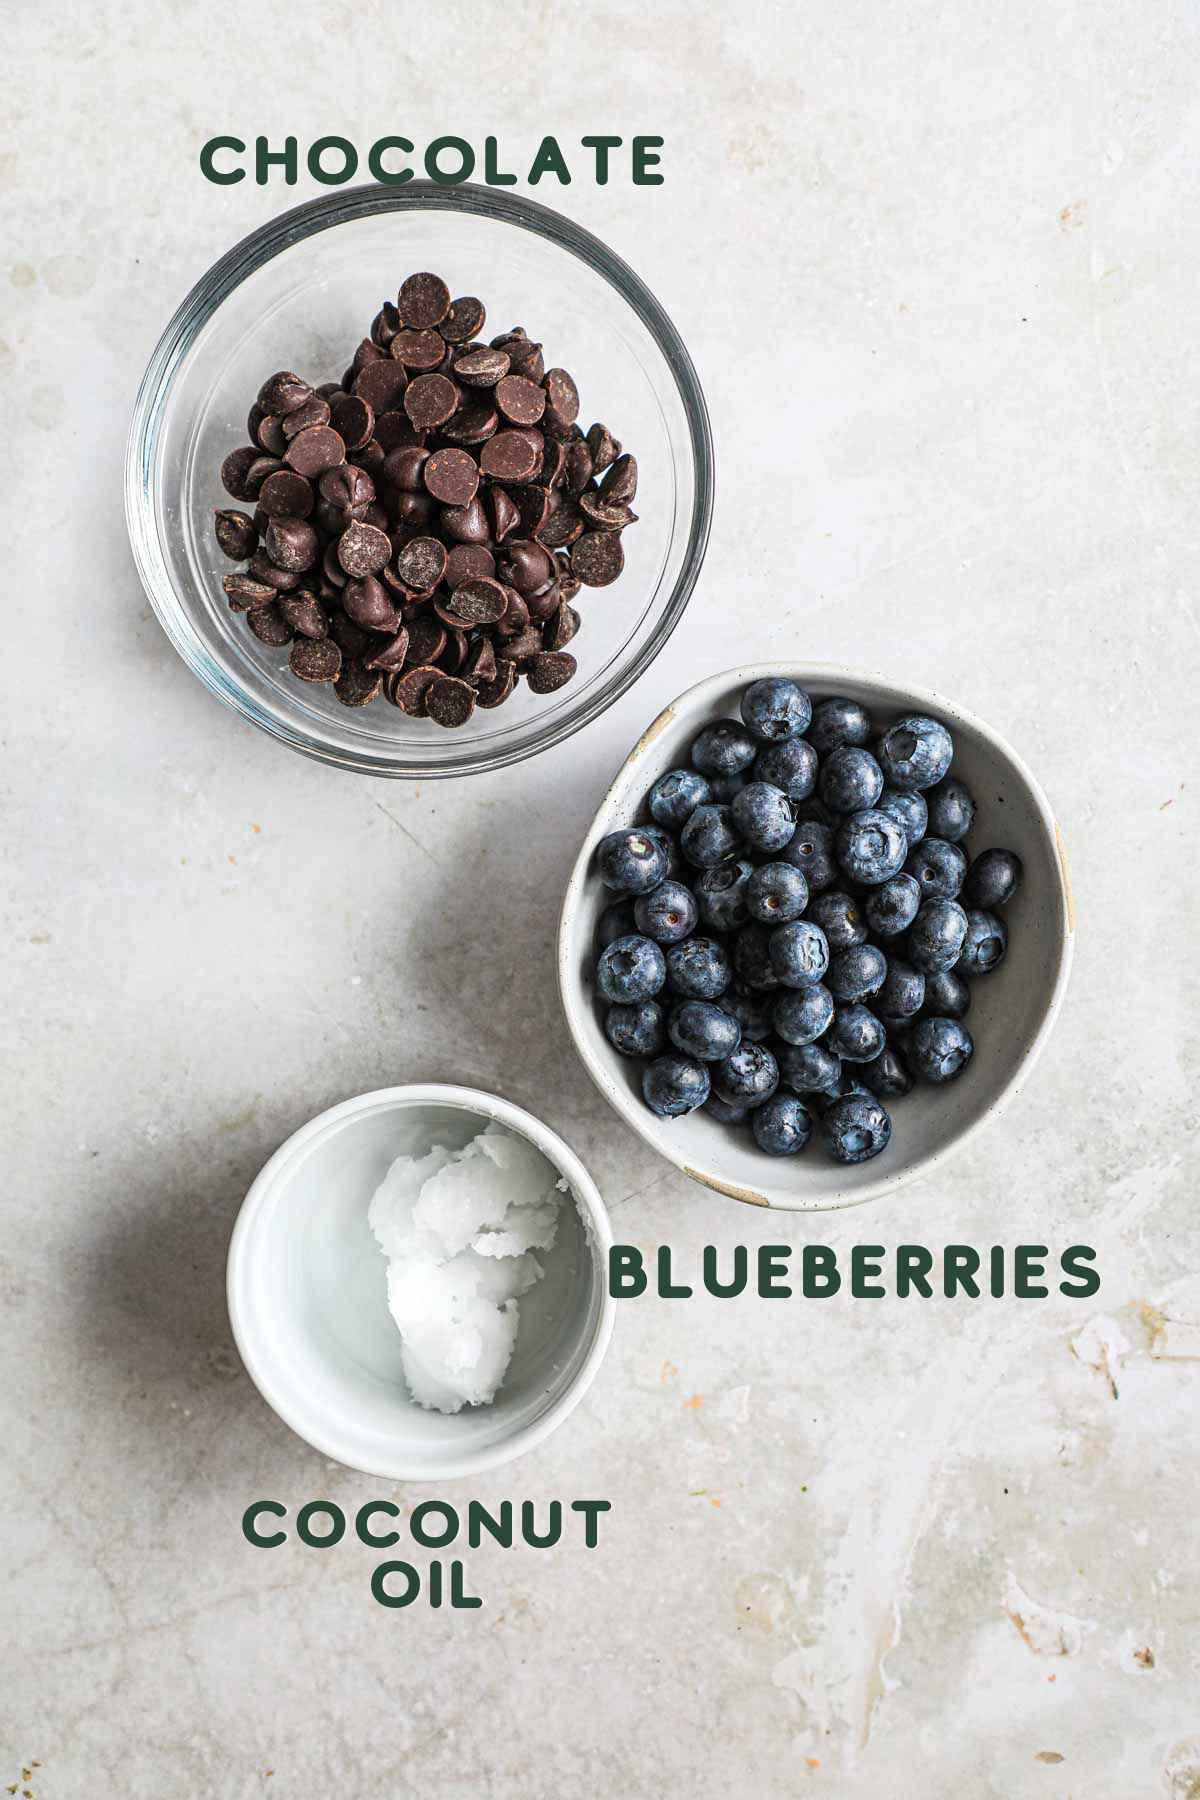 Ingredients to make easy chocolate covered blueberries, including chocolate, coconut oil, and blueberries.